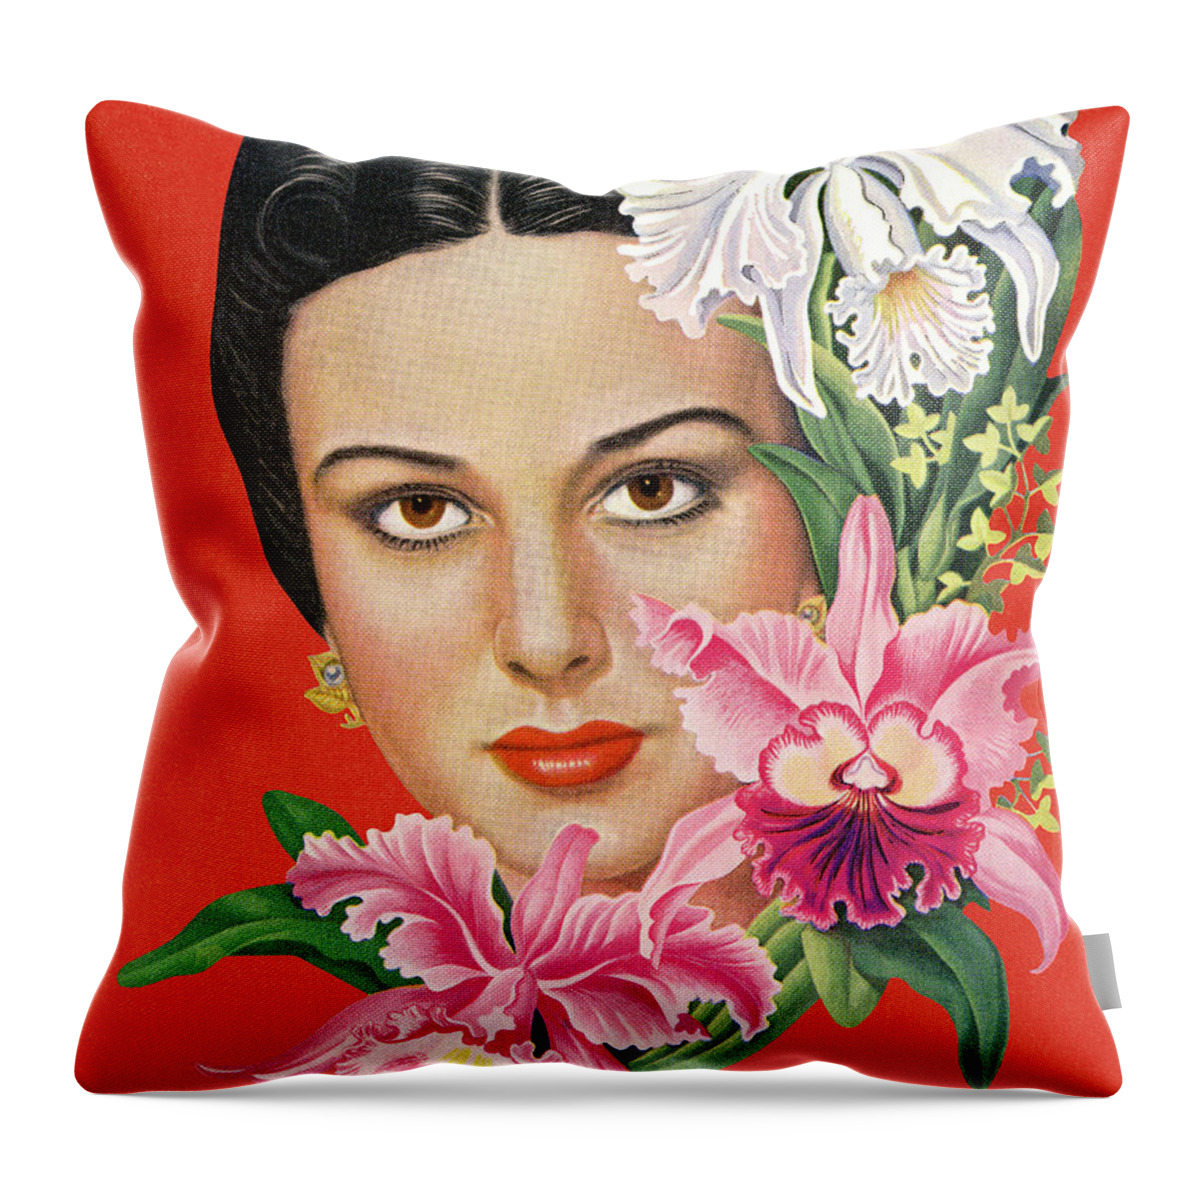 Adult Throw Pillow featuring the drawing Woman With Tropical Flowers by CSA Images